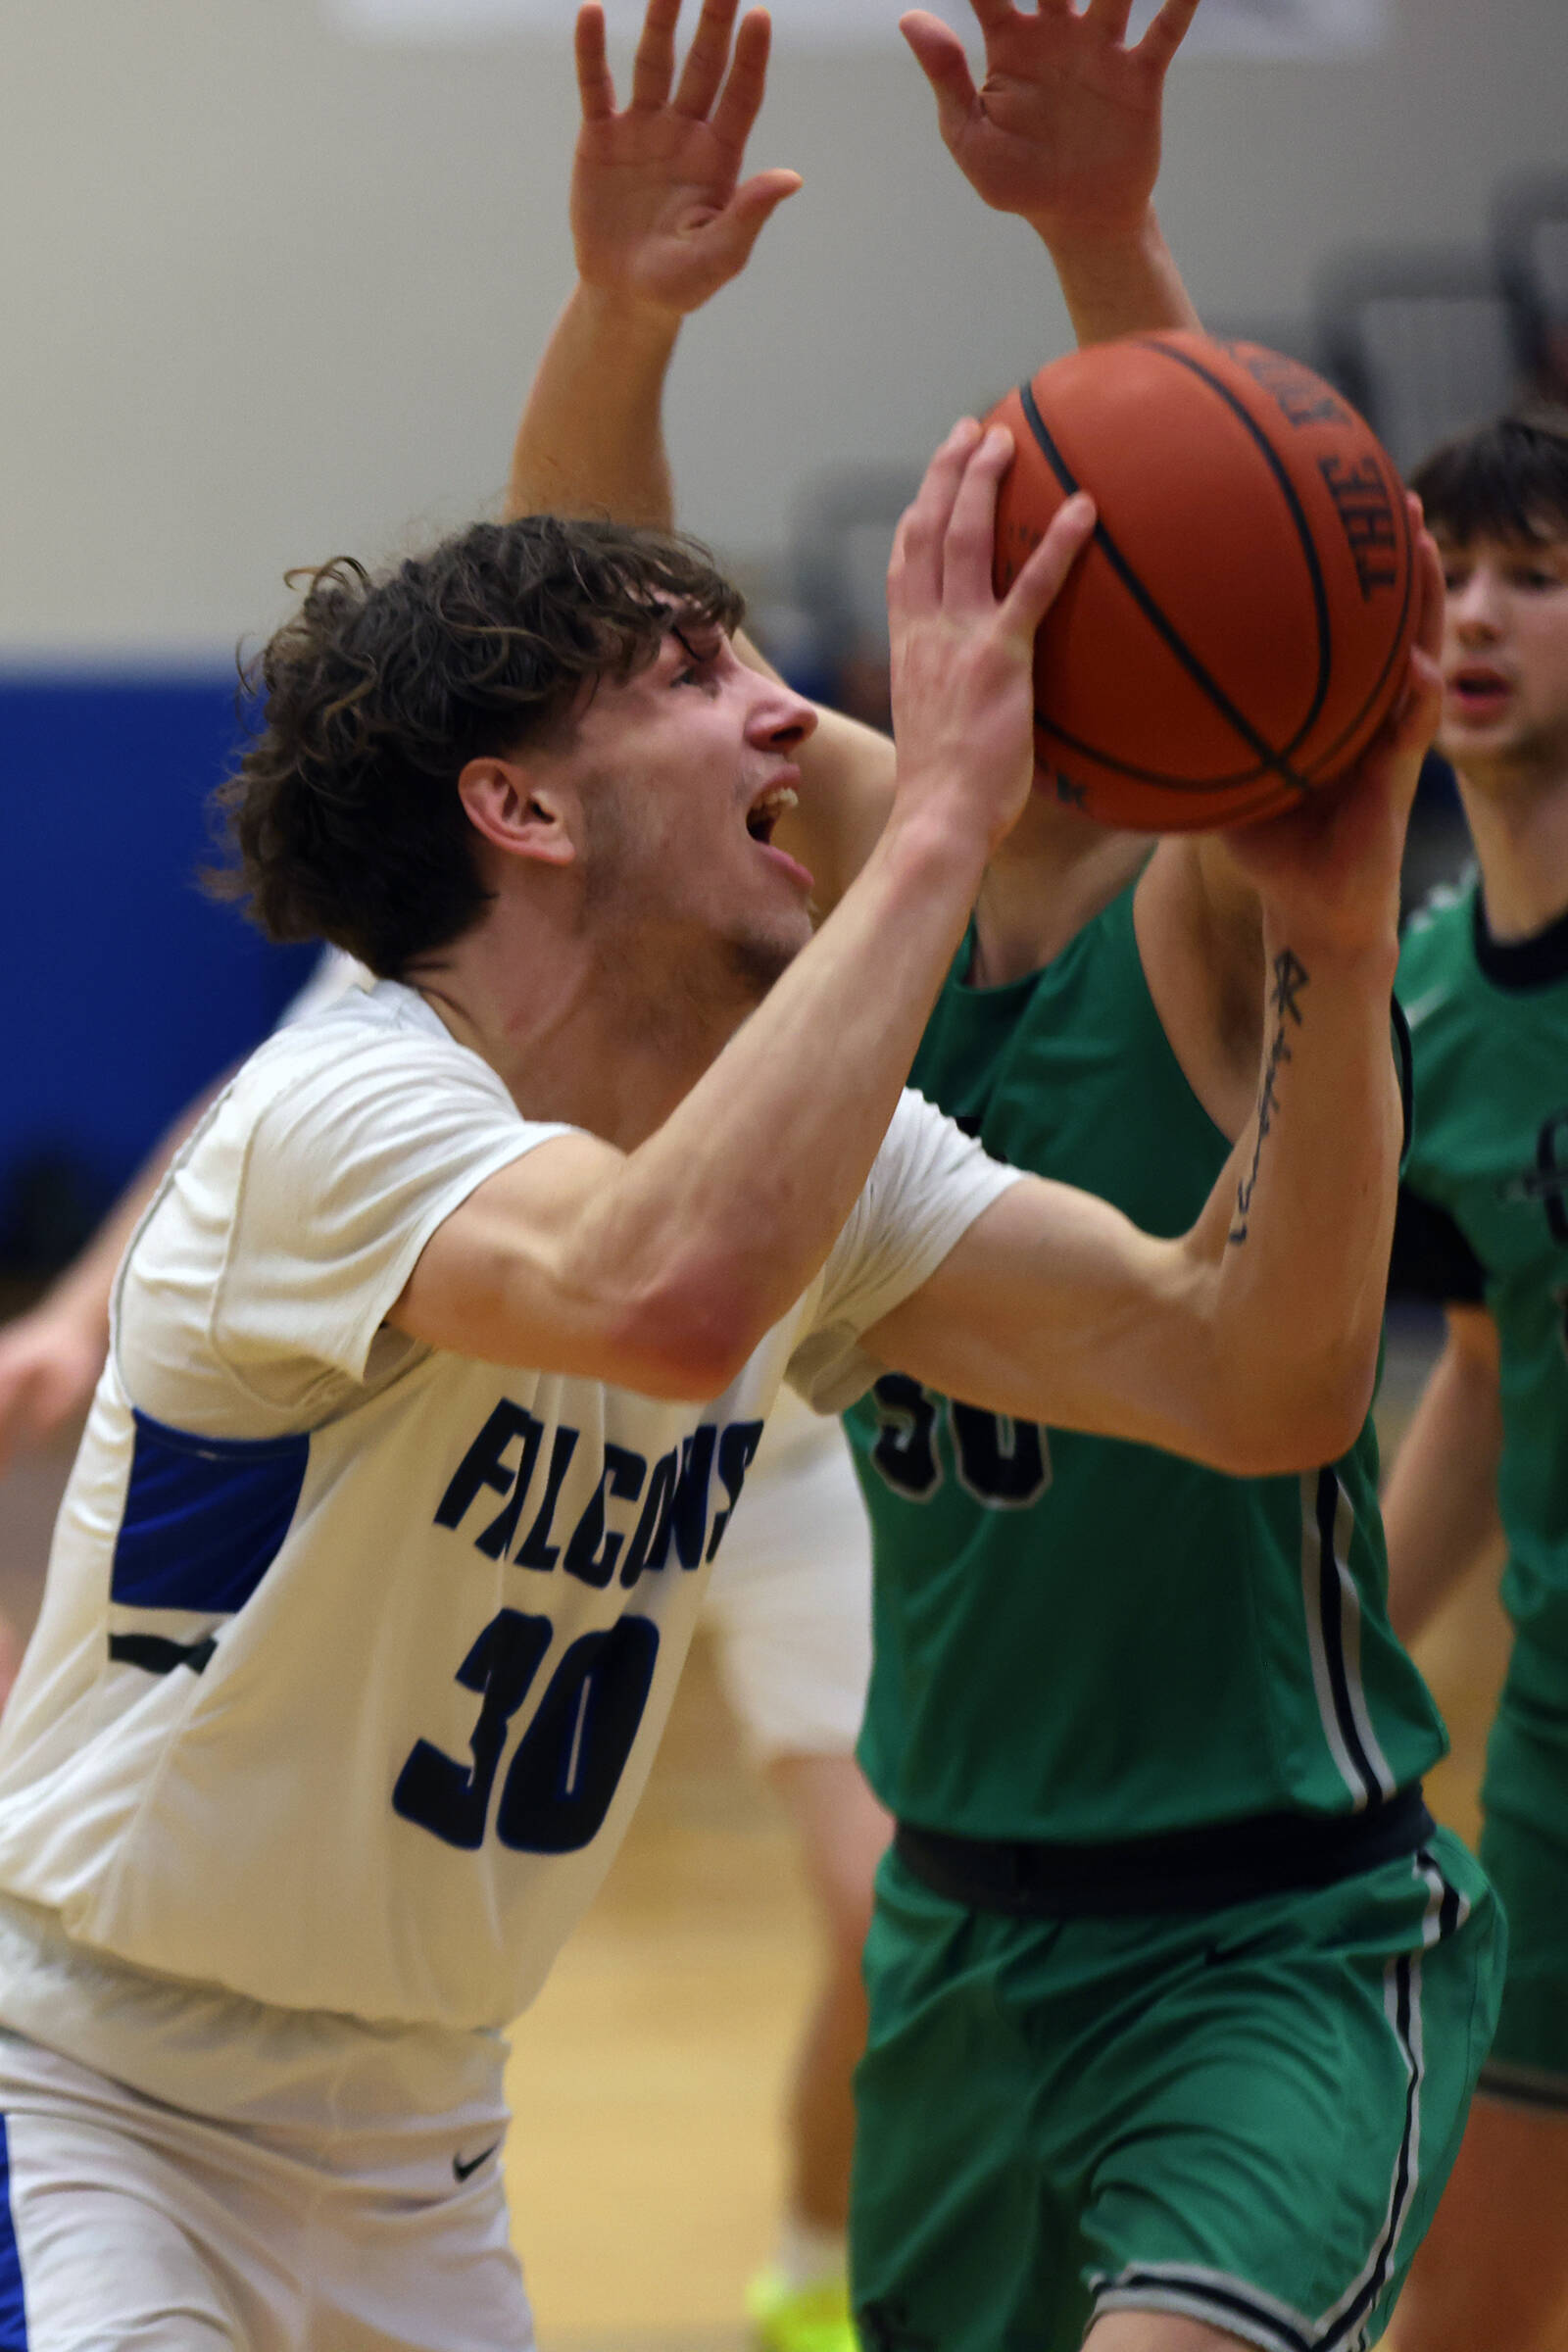 TMHS junior Thomas Baxter fights his way toward the hoop during a Thursday night home game against Colony. In Friday’s rematch, Baxter led all scorers with 27 points. (Ben Hohenstatt / Juneau Empire)